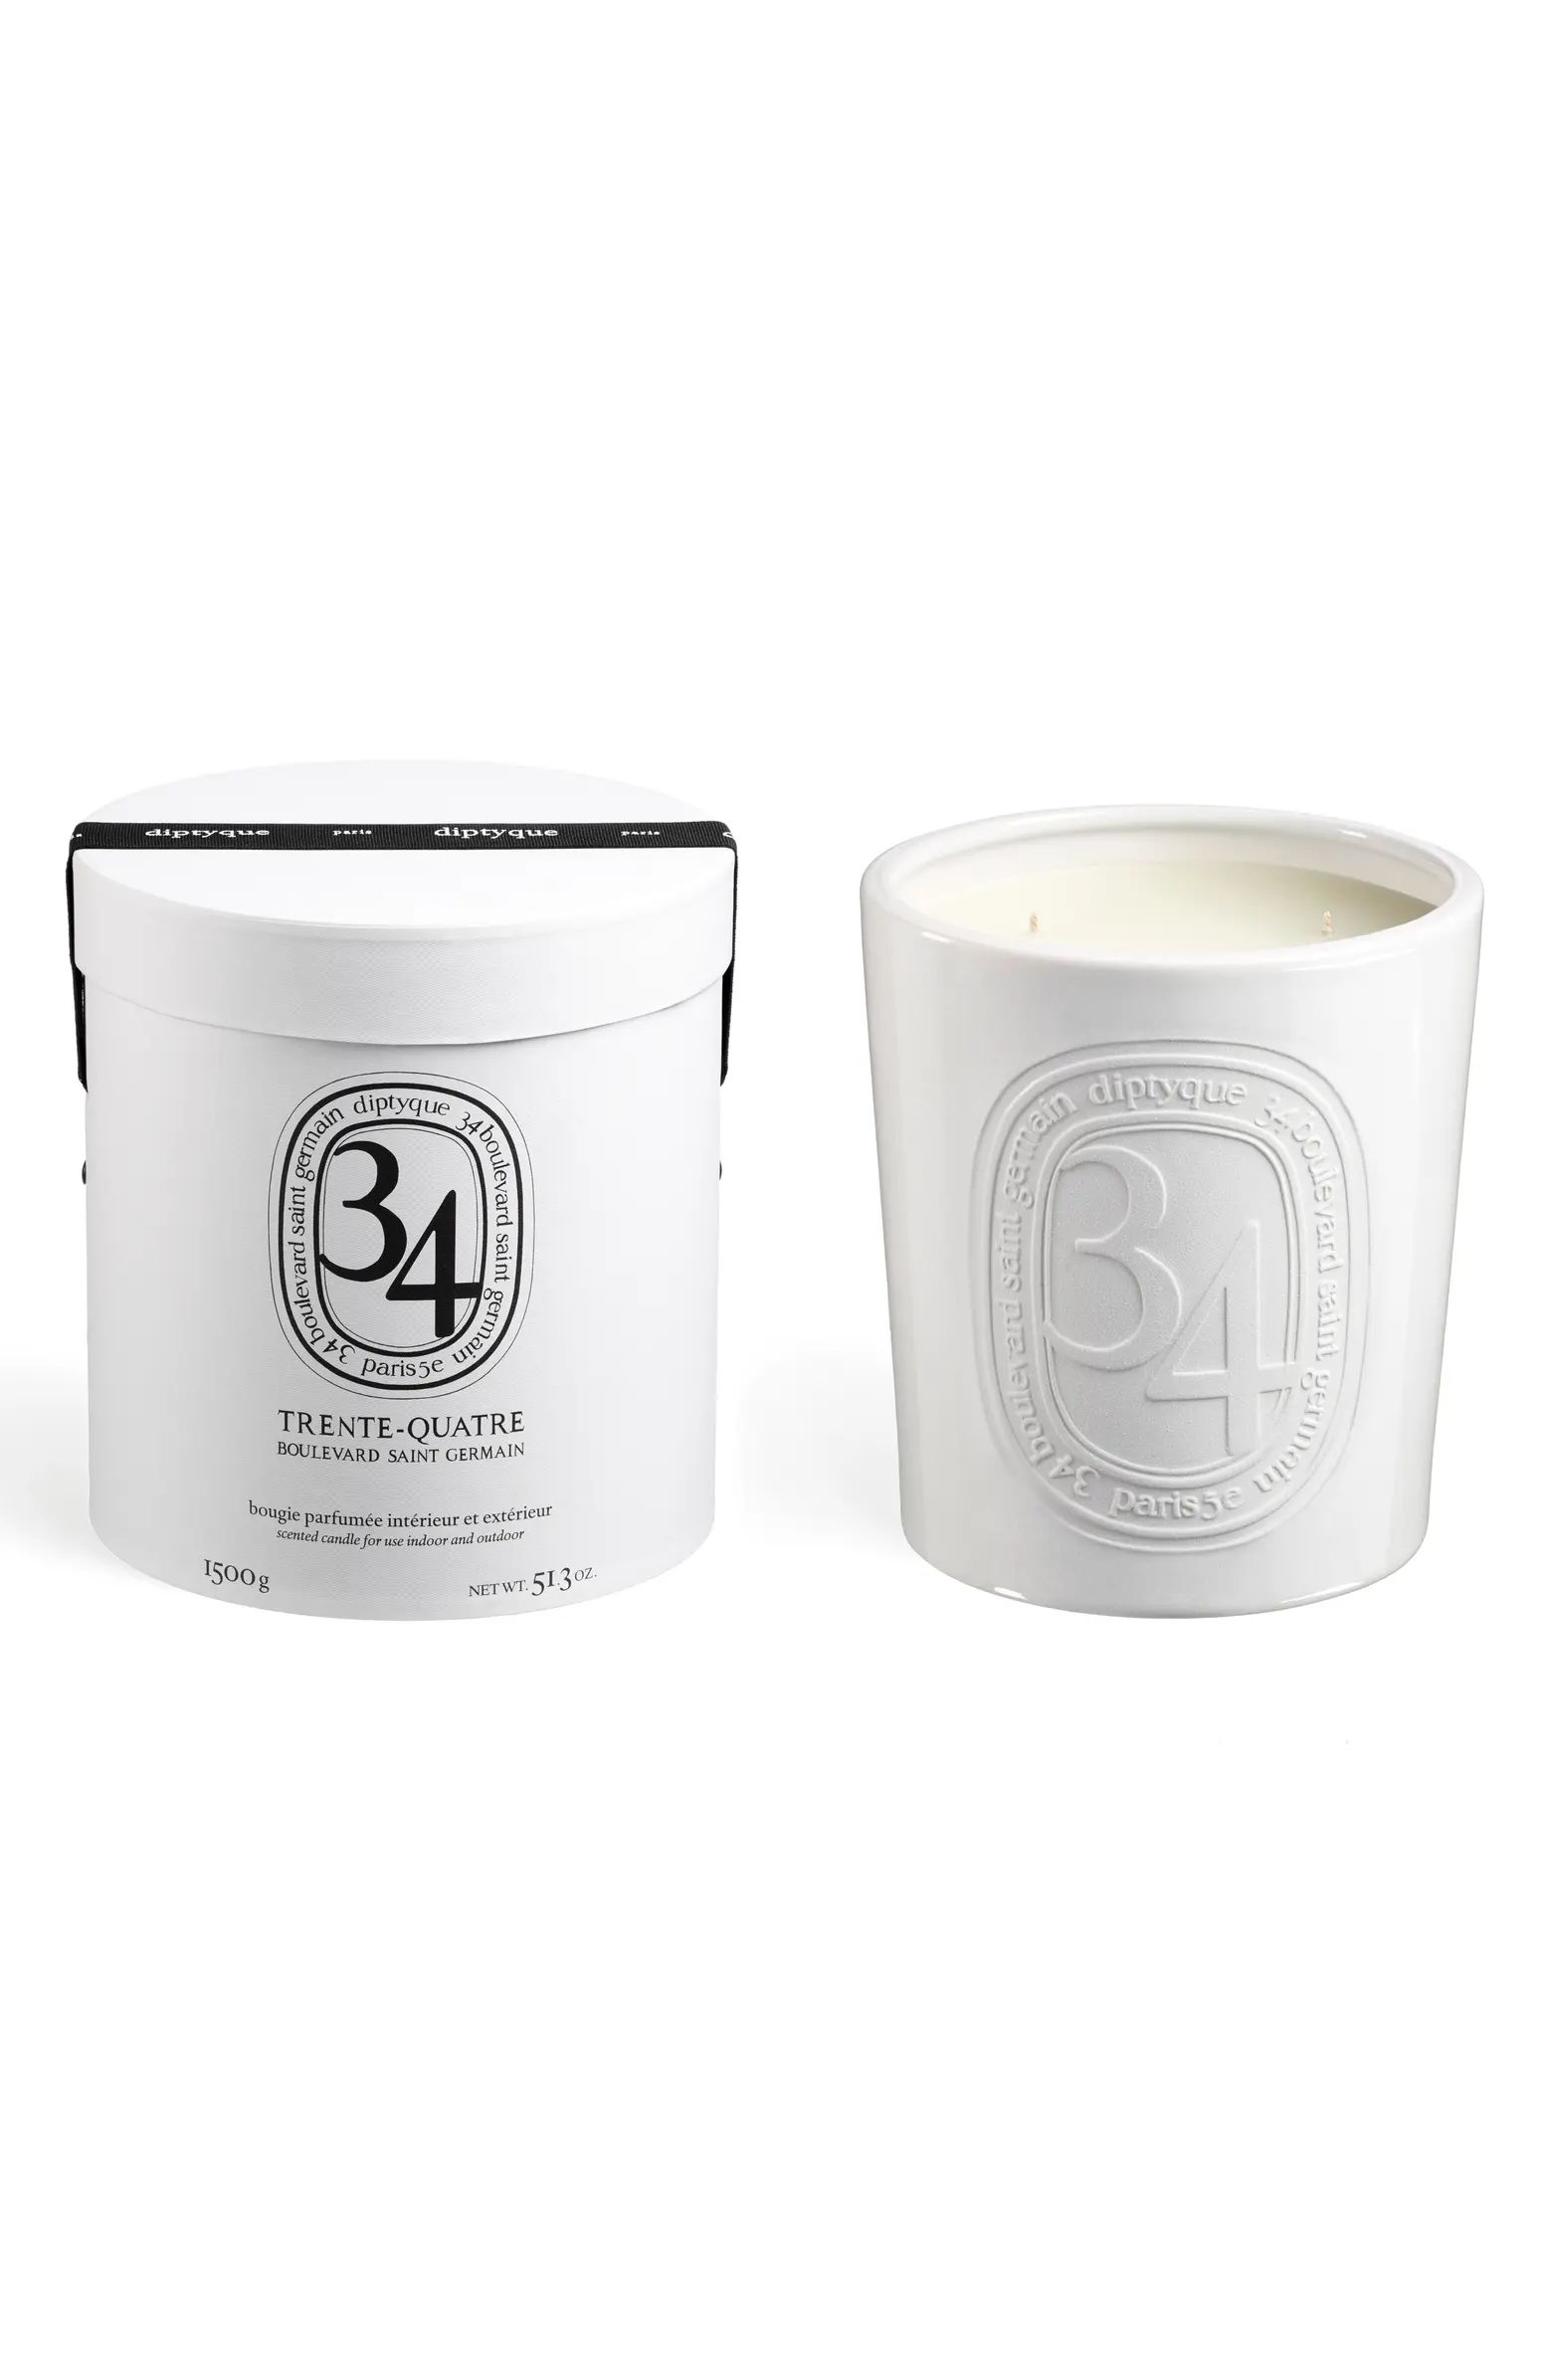 Diptyque 34 Boulevard Saint Germain Large Scented Candle | Nordstrom | Nordstrom